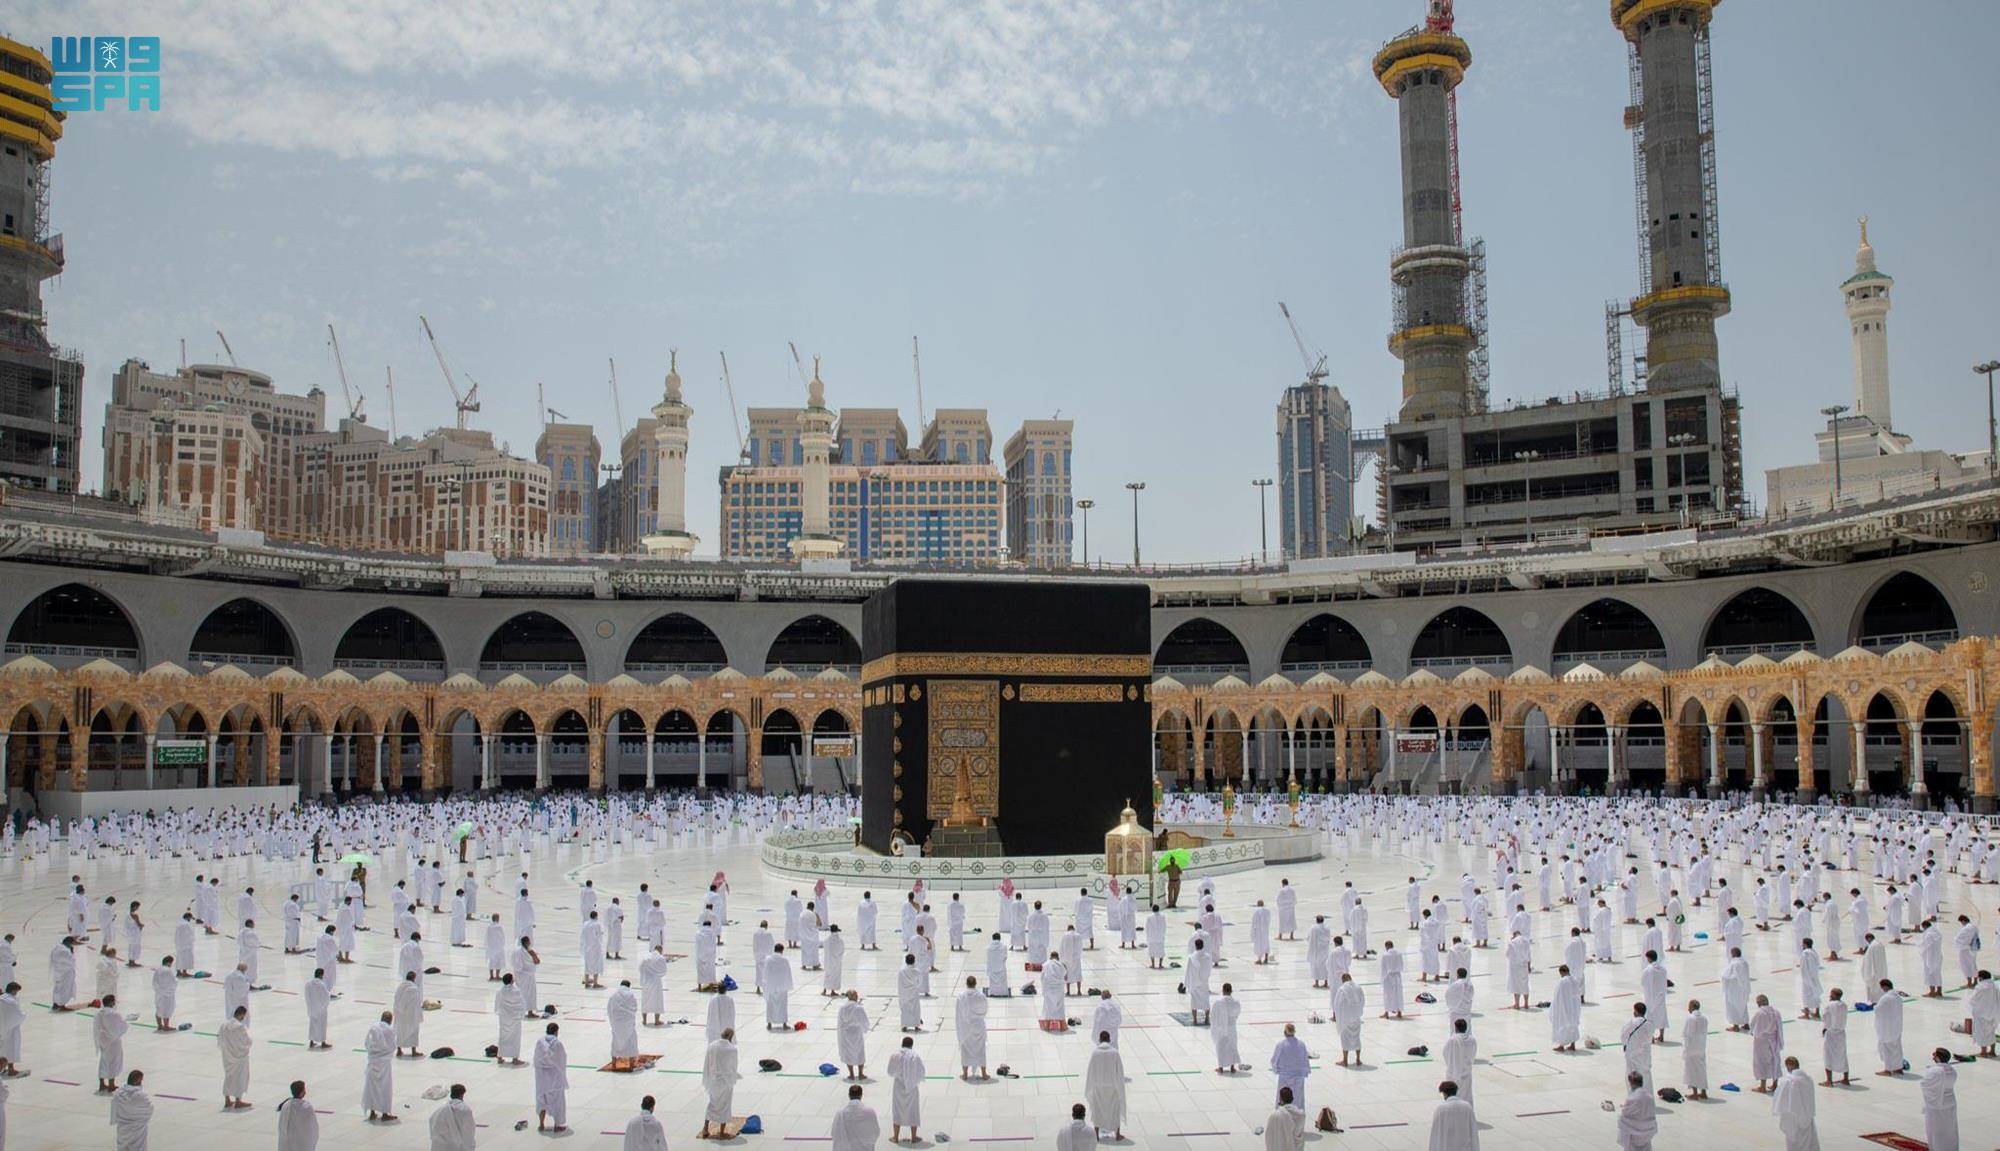 Muslims perform Friday prayers while practicing social distancing in the Grand Mosque during the holy month of Ramadan, in the holy city of Mecca, Saudi Arabia, April 16, 2021. Saudi Press Agency/Handout via REUTERS